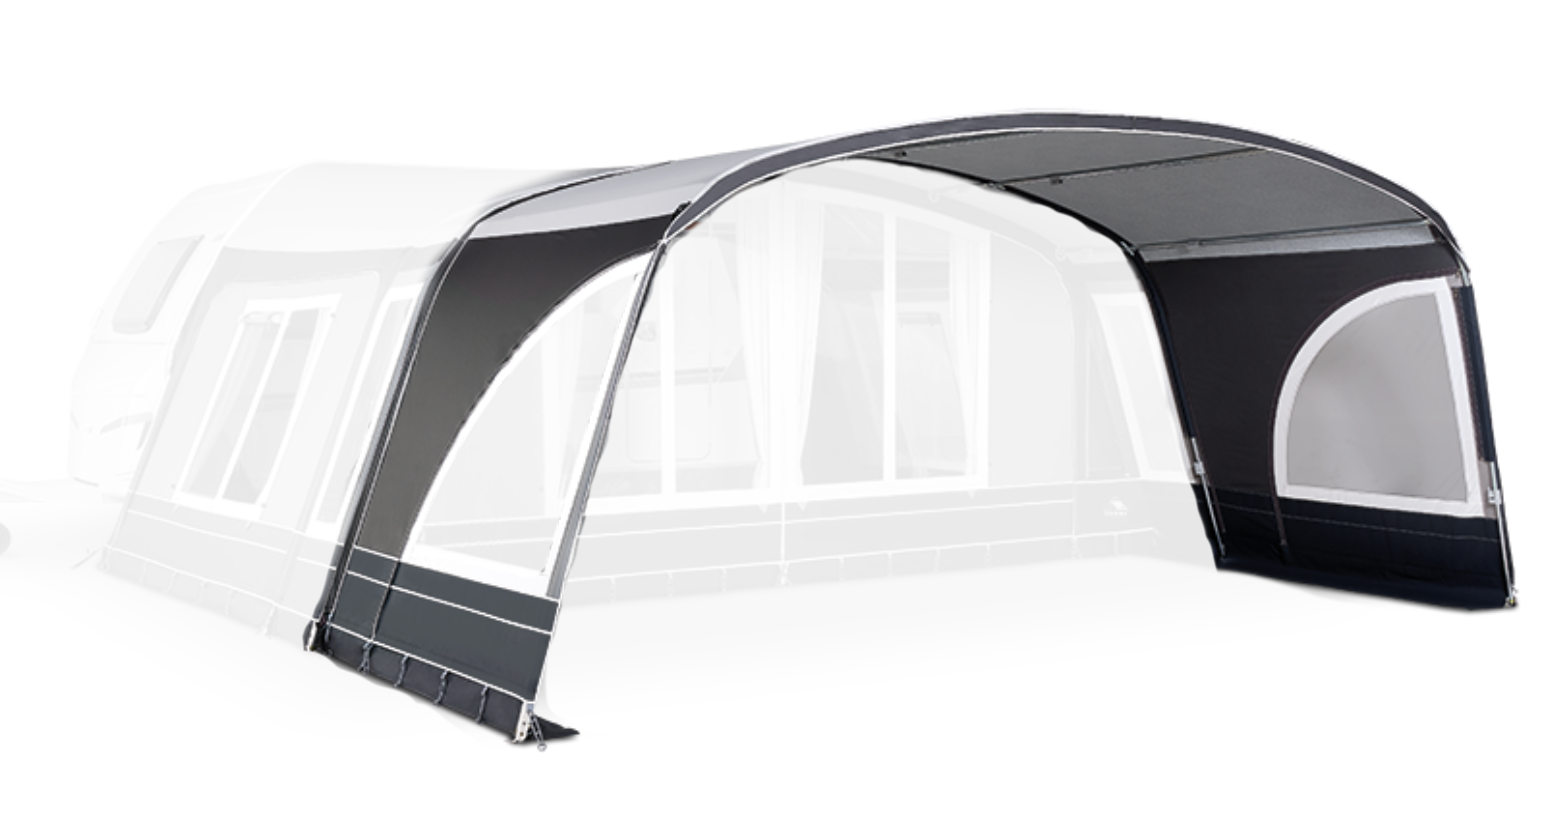 dorema onyx 270 caravan awning sun canopy side in-fill set 2022 collection